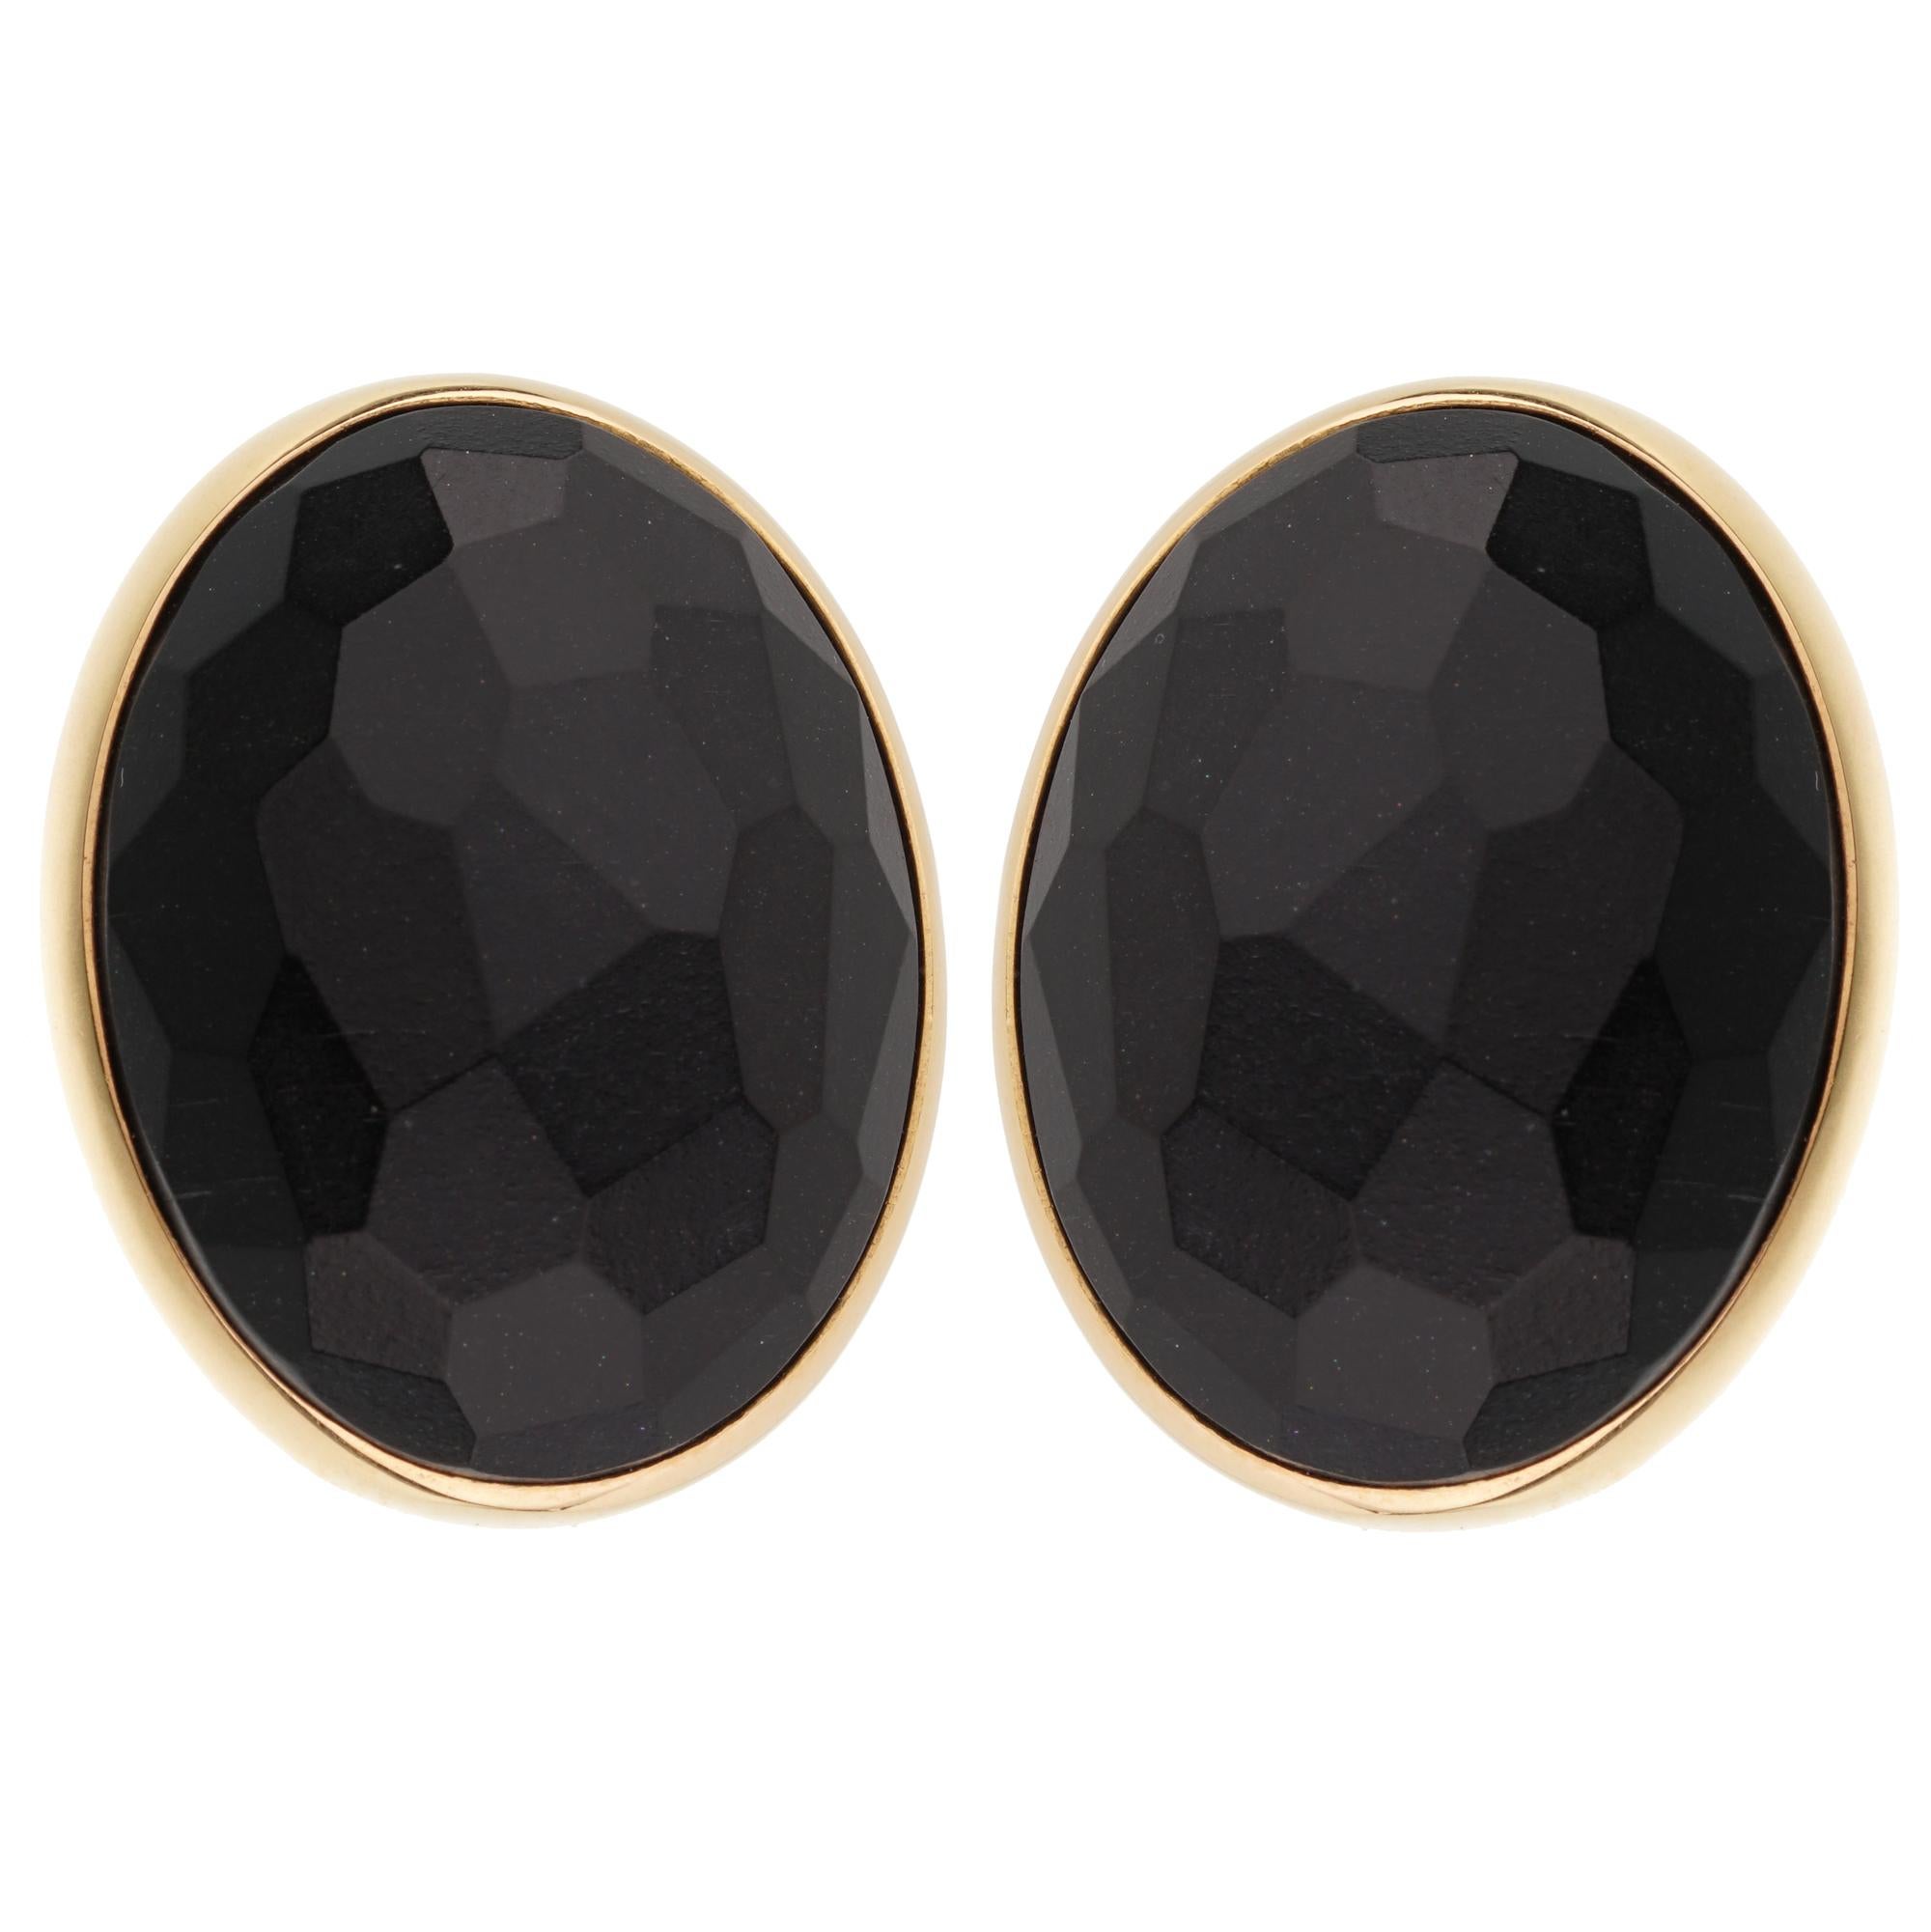 Pomellato 17.90ct Black Jet Rose Gold Earrings In Excellent Condition For Sale In Feasterville, PA